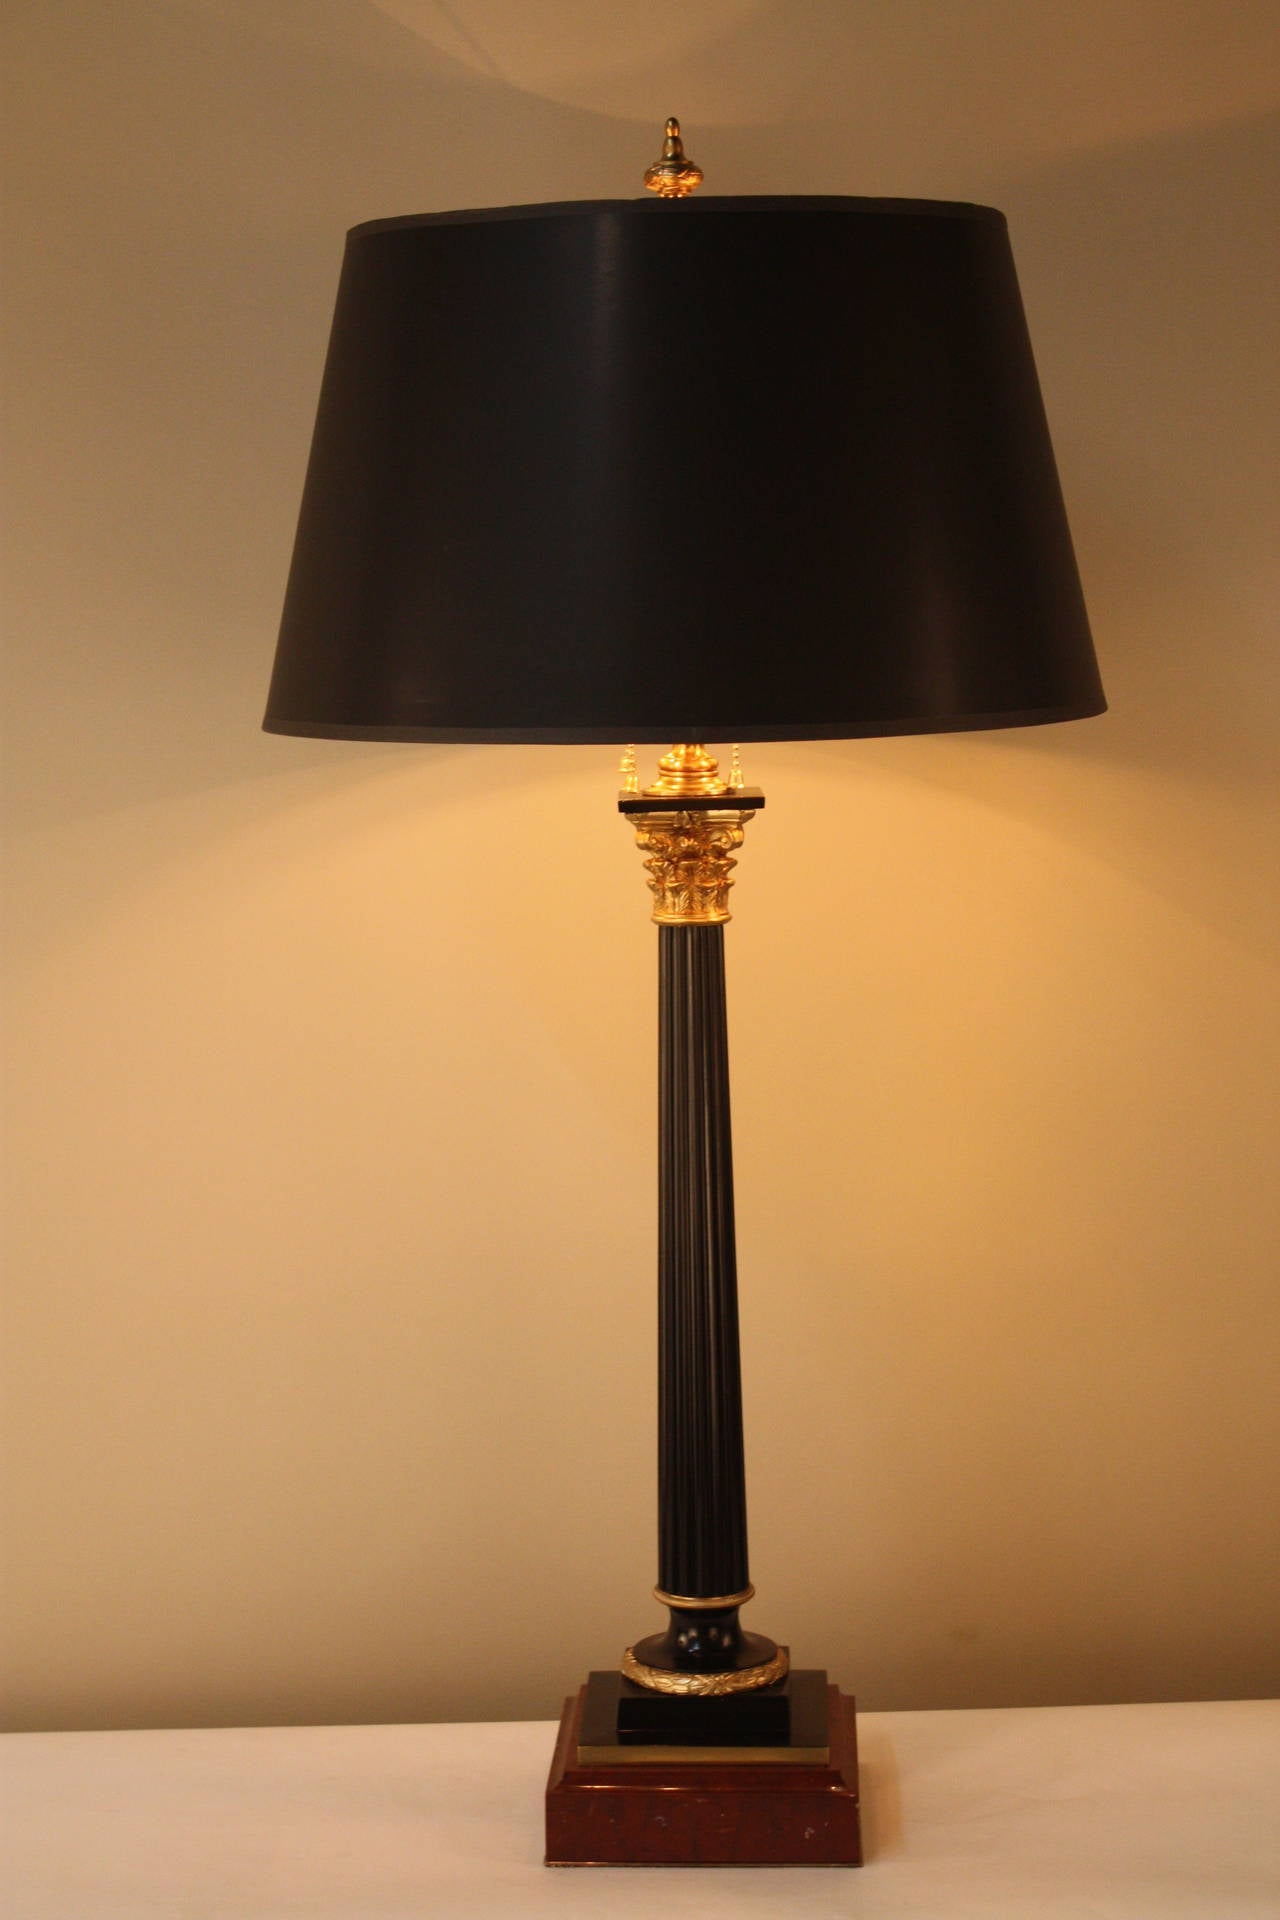 This fantastic French table lamp originally served as base for an oil lamp in the 19th century. It has been custom converted and electrified, and is now an electric table lamp with three American sockets. 

While it may not burn oil anymore, this